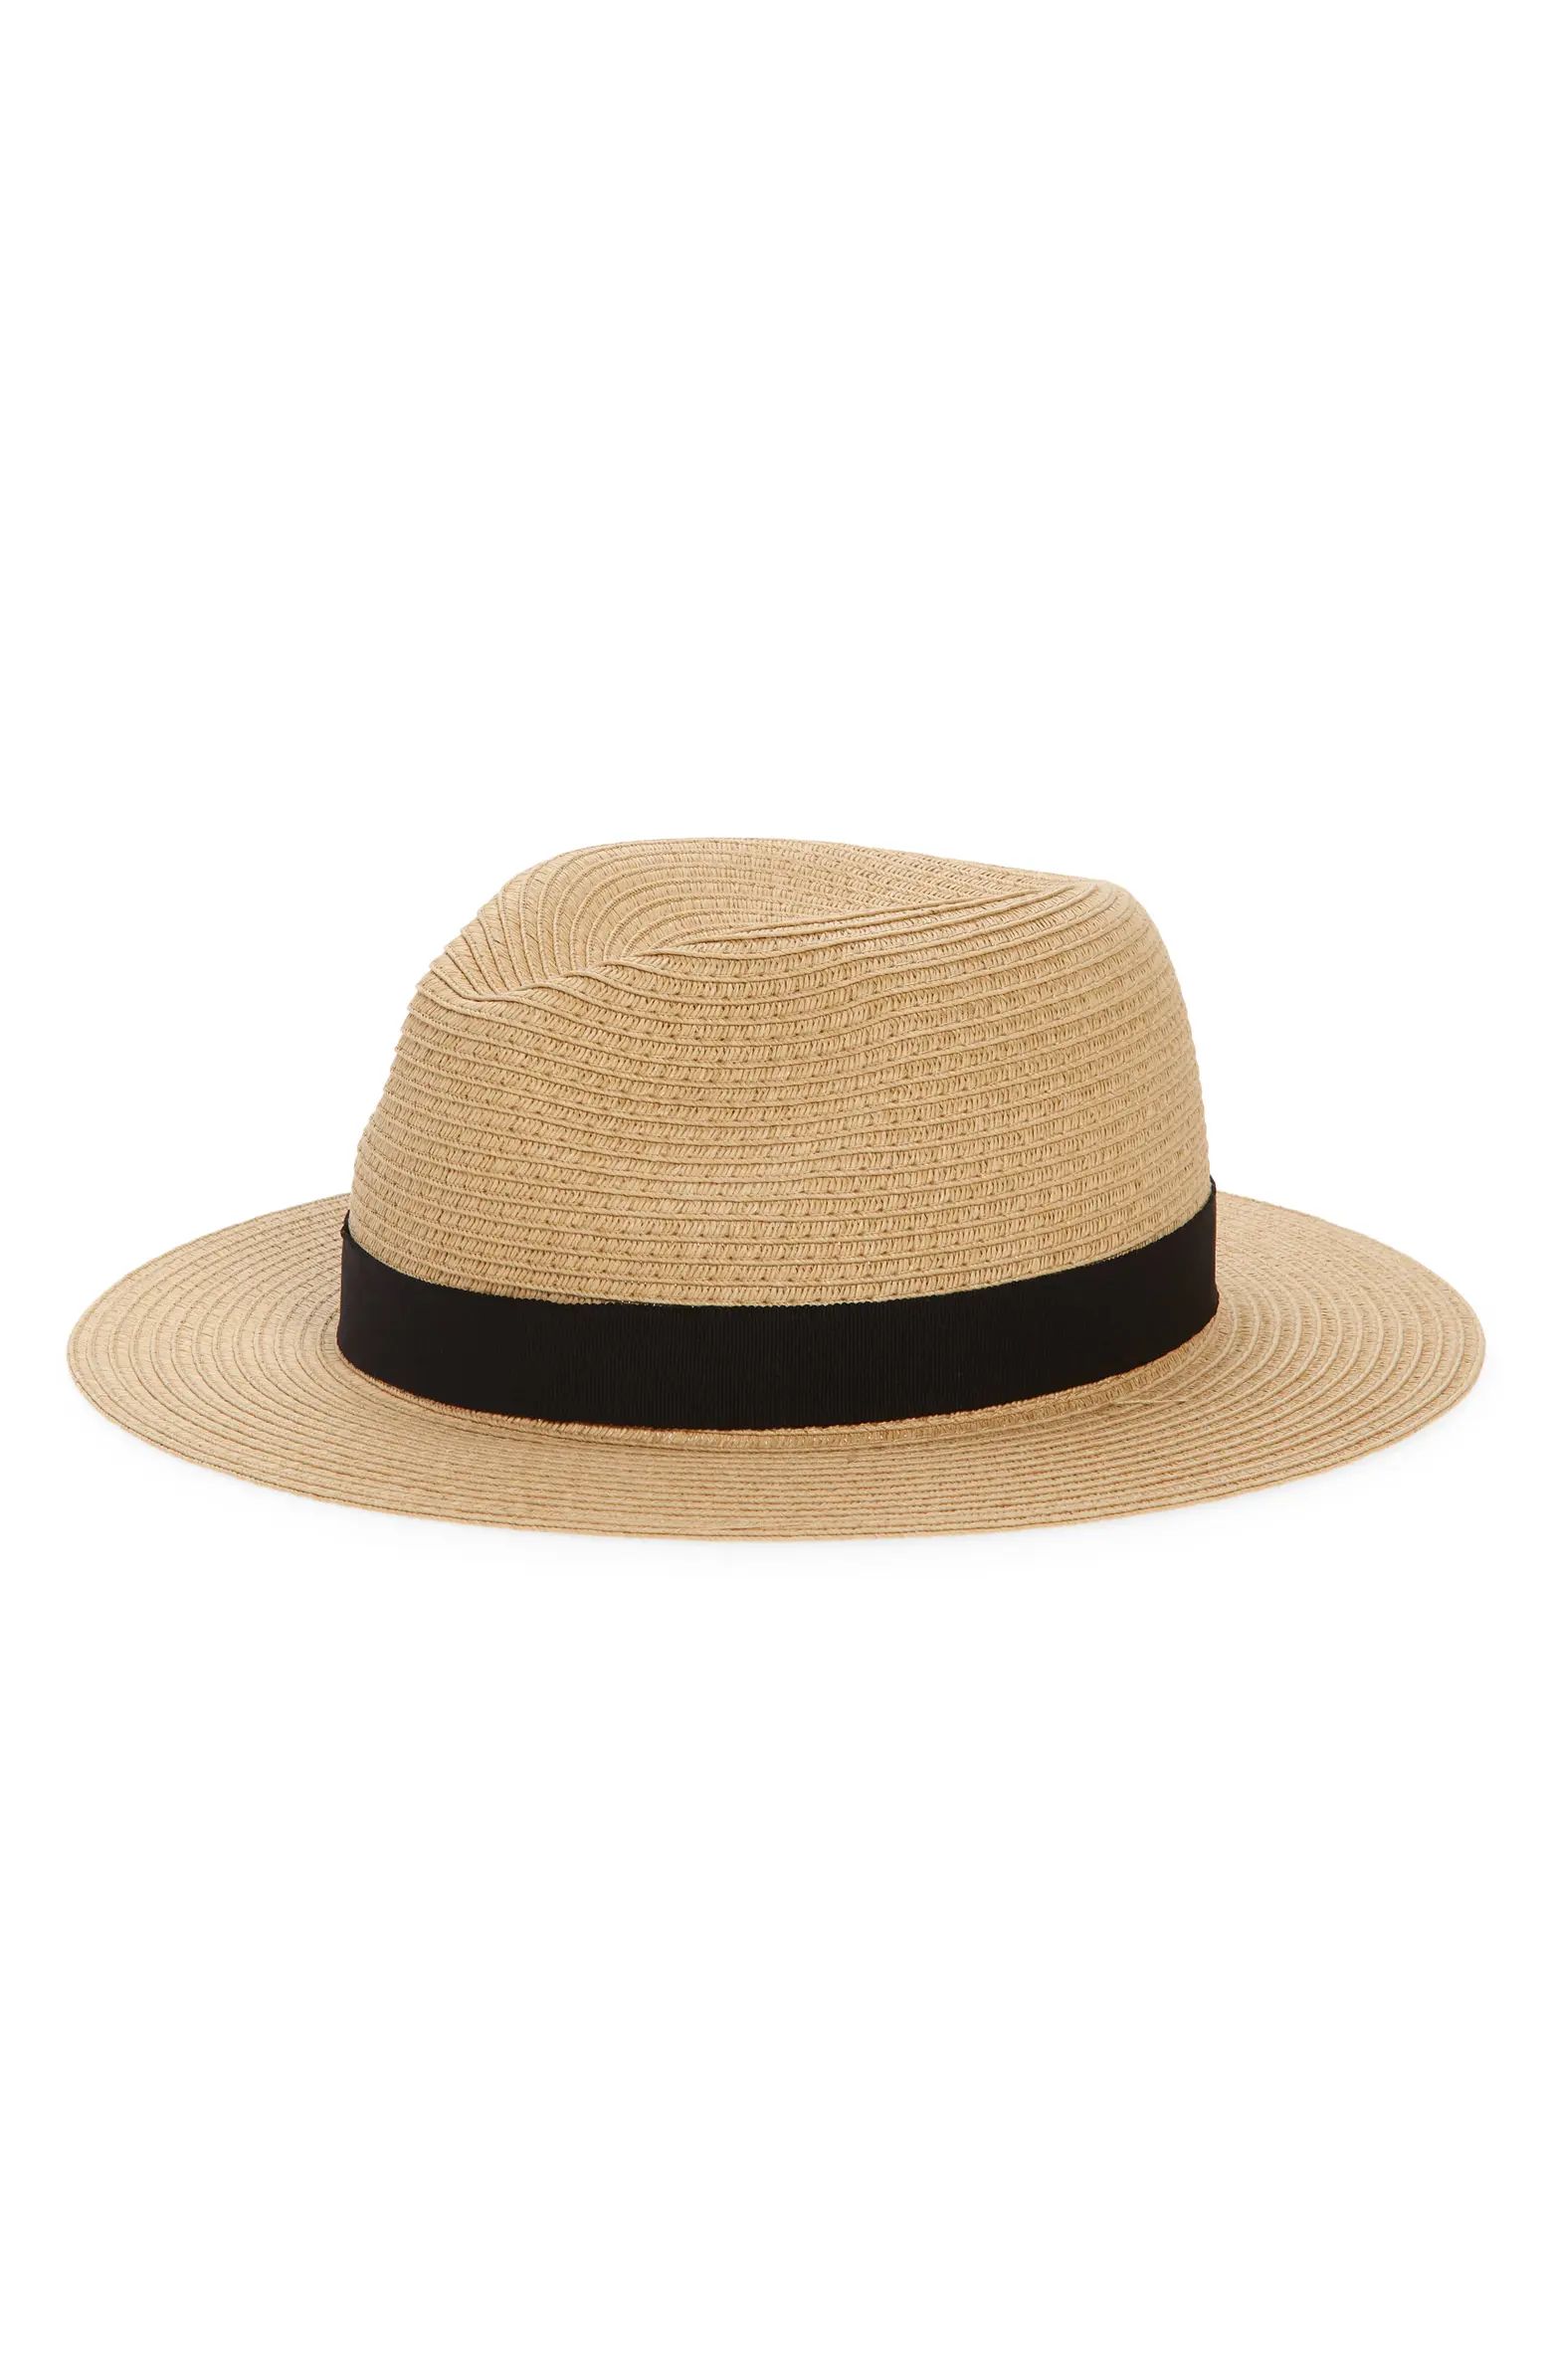 Madewell Packable Straw Fedora Hat | Nordstrom | Nordstrom